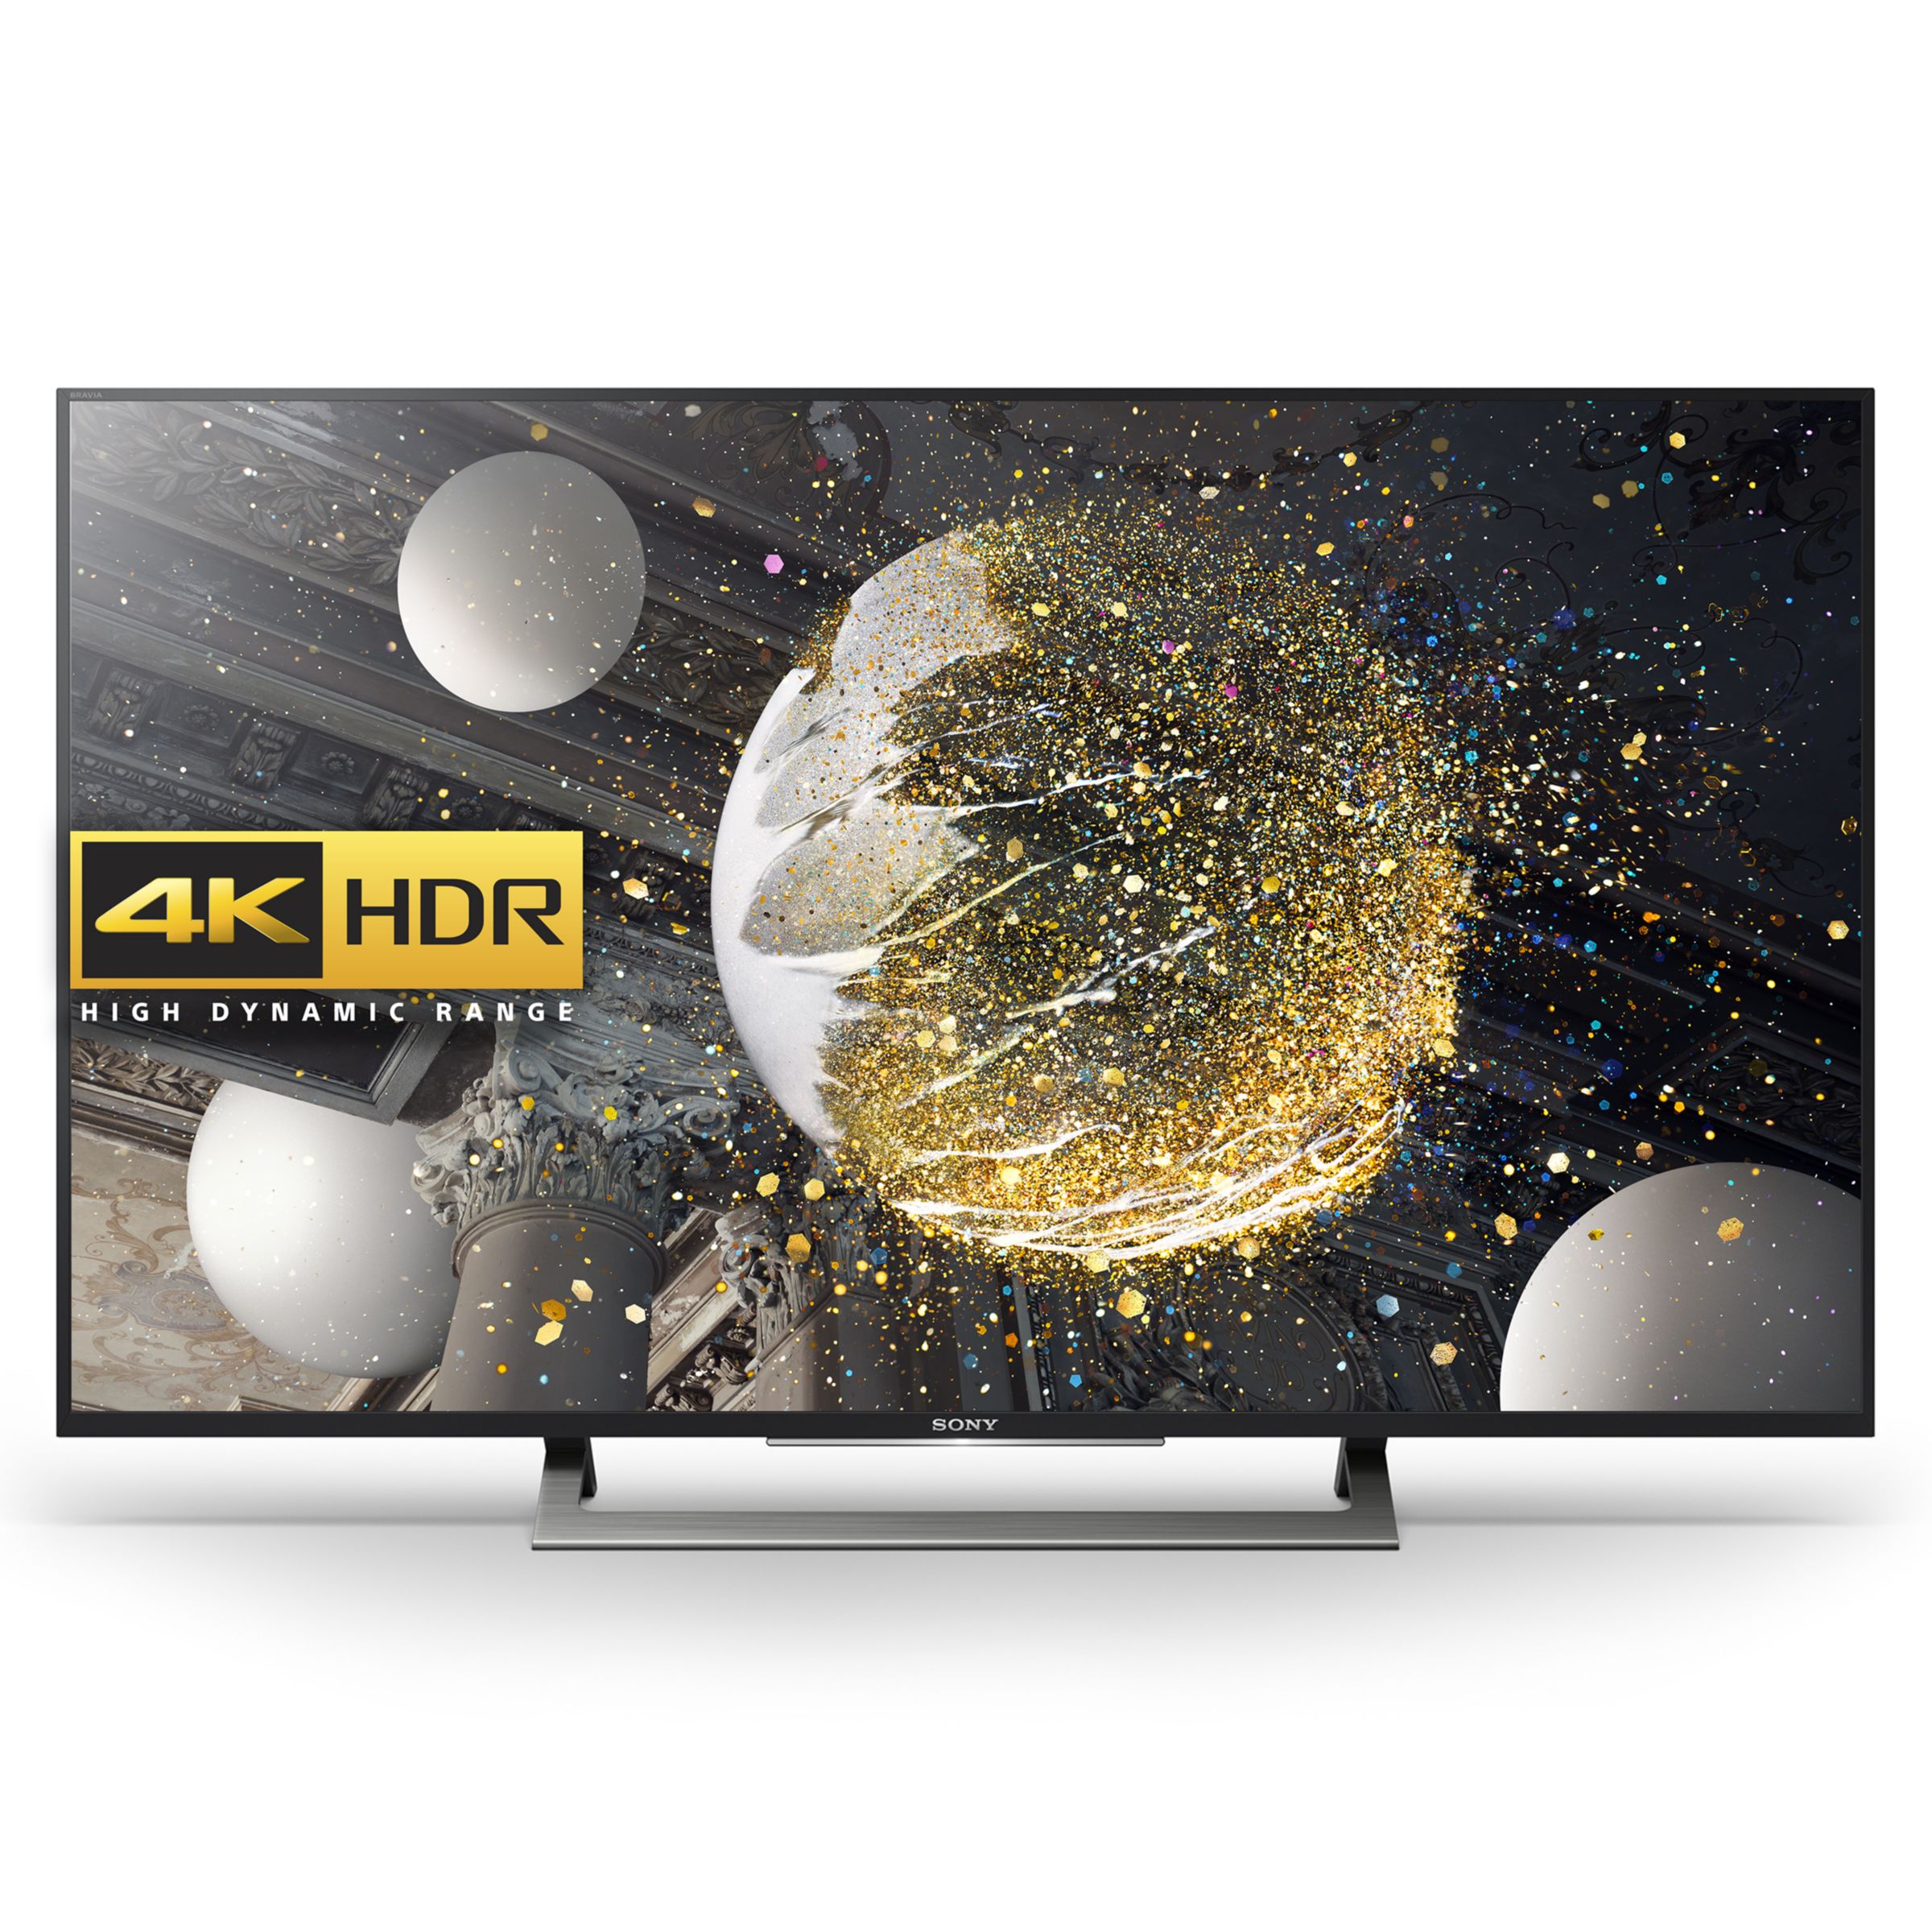 Sony Bravia 49XD8077/8099 LED HDR 4K Ultra HD Android TV, 49" With Youview/Freeview HD & Silver Slate Design